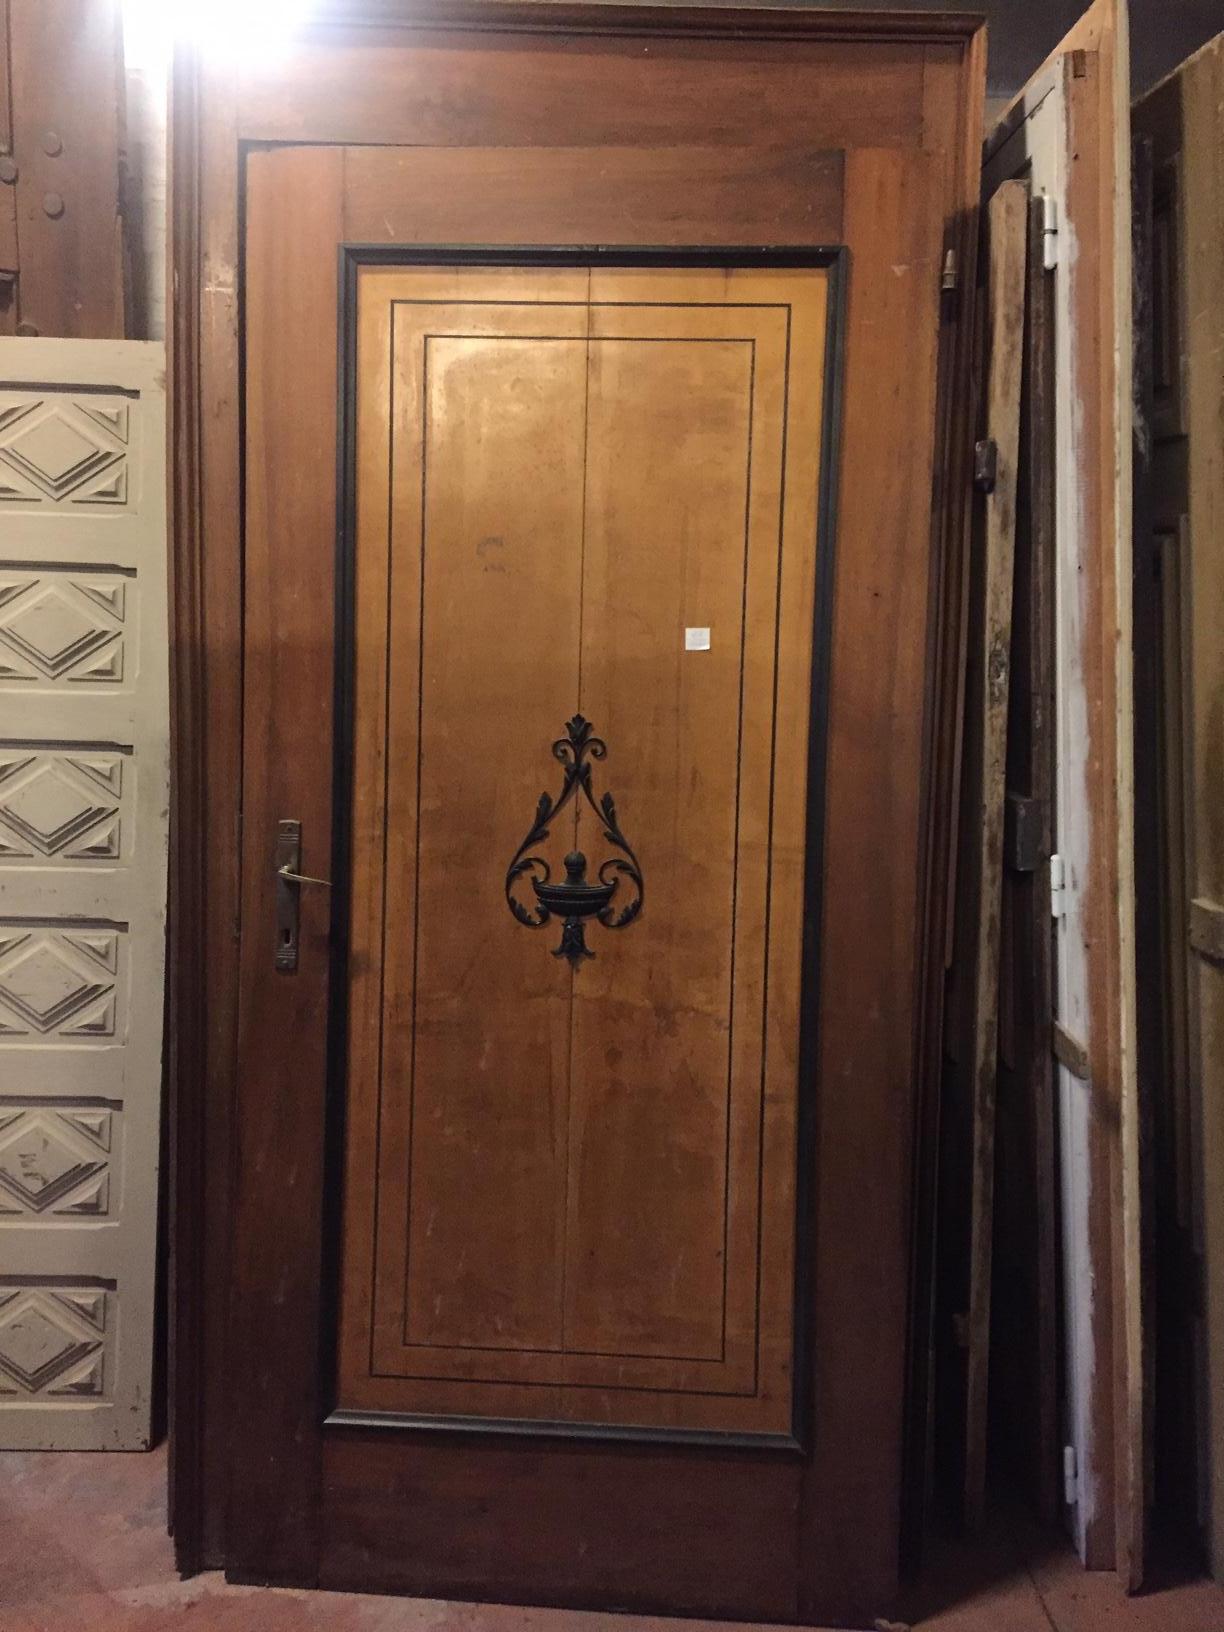 Antique walnut and maple door with frame.
N.8 of the same old wooden doors in different colors, they are 8 unobtainable in excellent condition with original irons and frames, complete and ready to be assembled '900 Italy